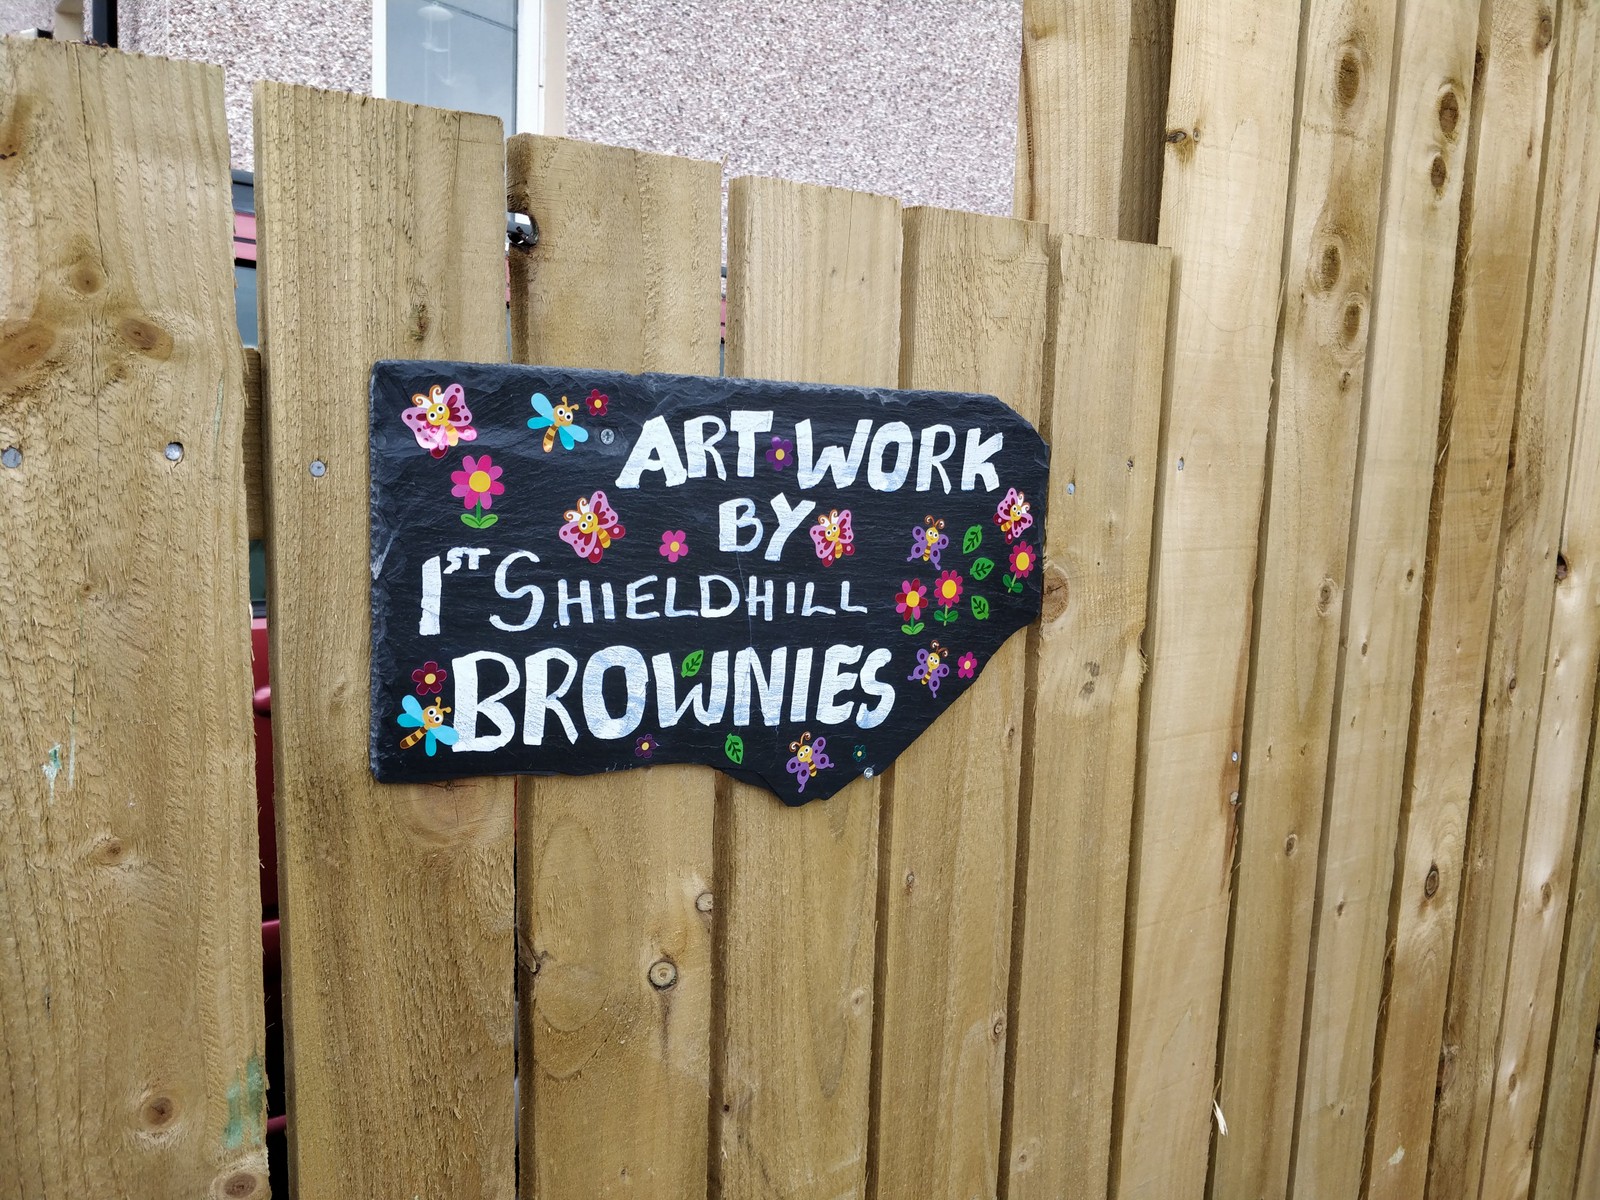 Artwork by 1st Shieldhill Brownies